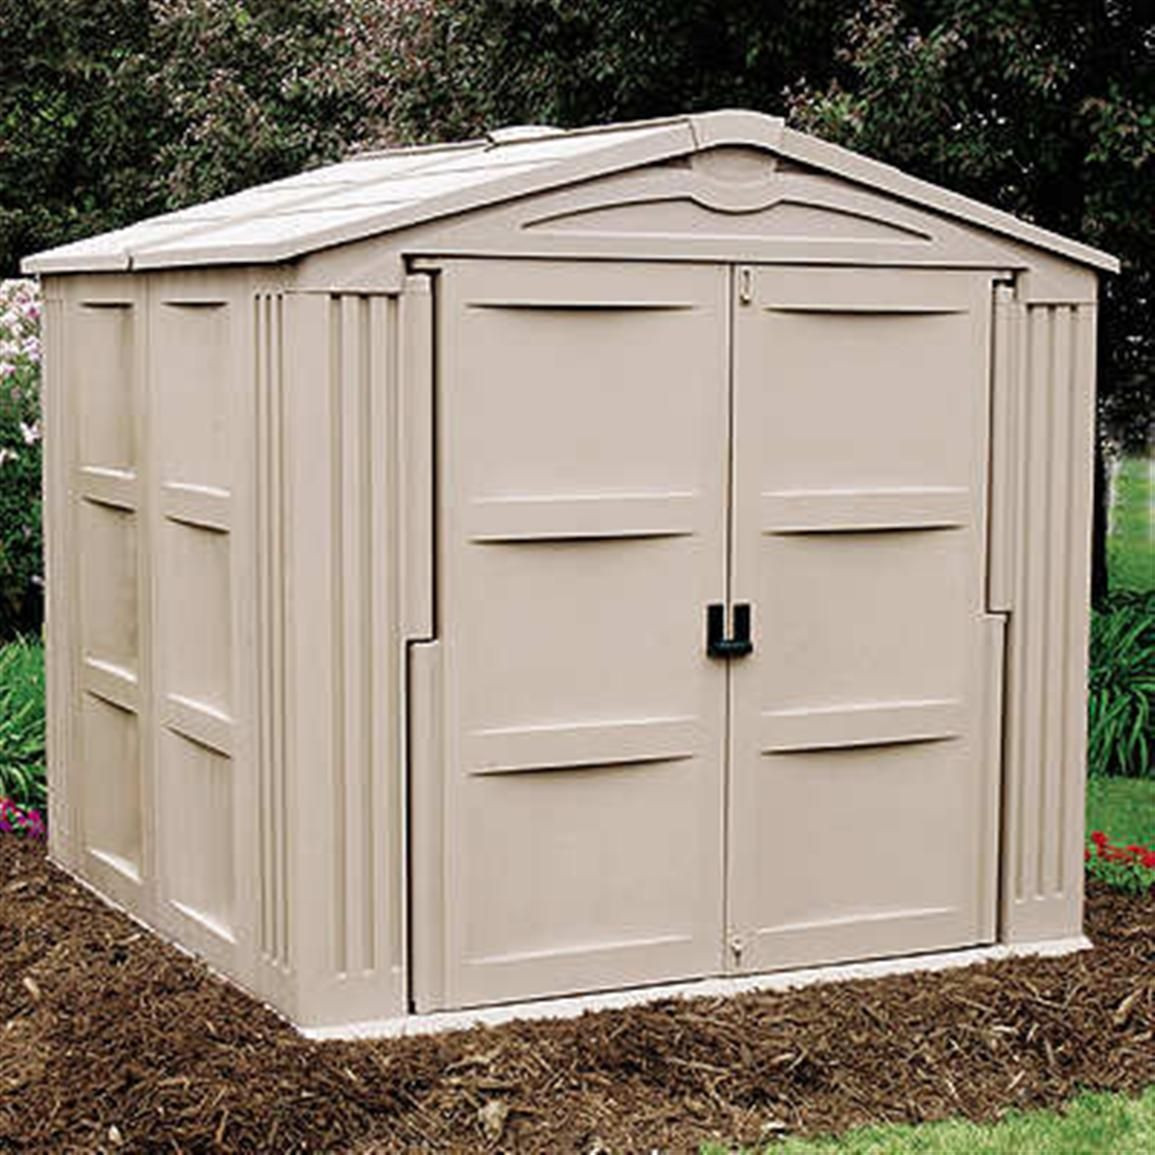 DIY Outdoor Sheds
 Easy Diy Storage Shed Ideas Just Craft & DIY Projects